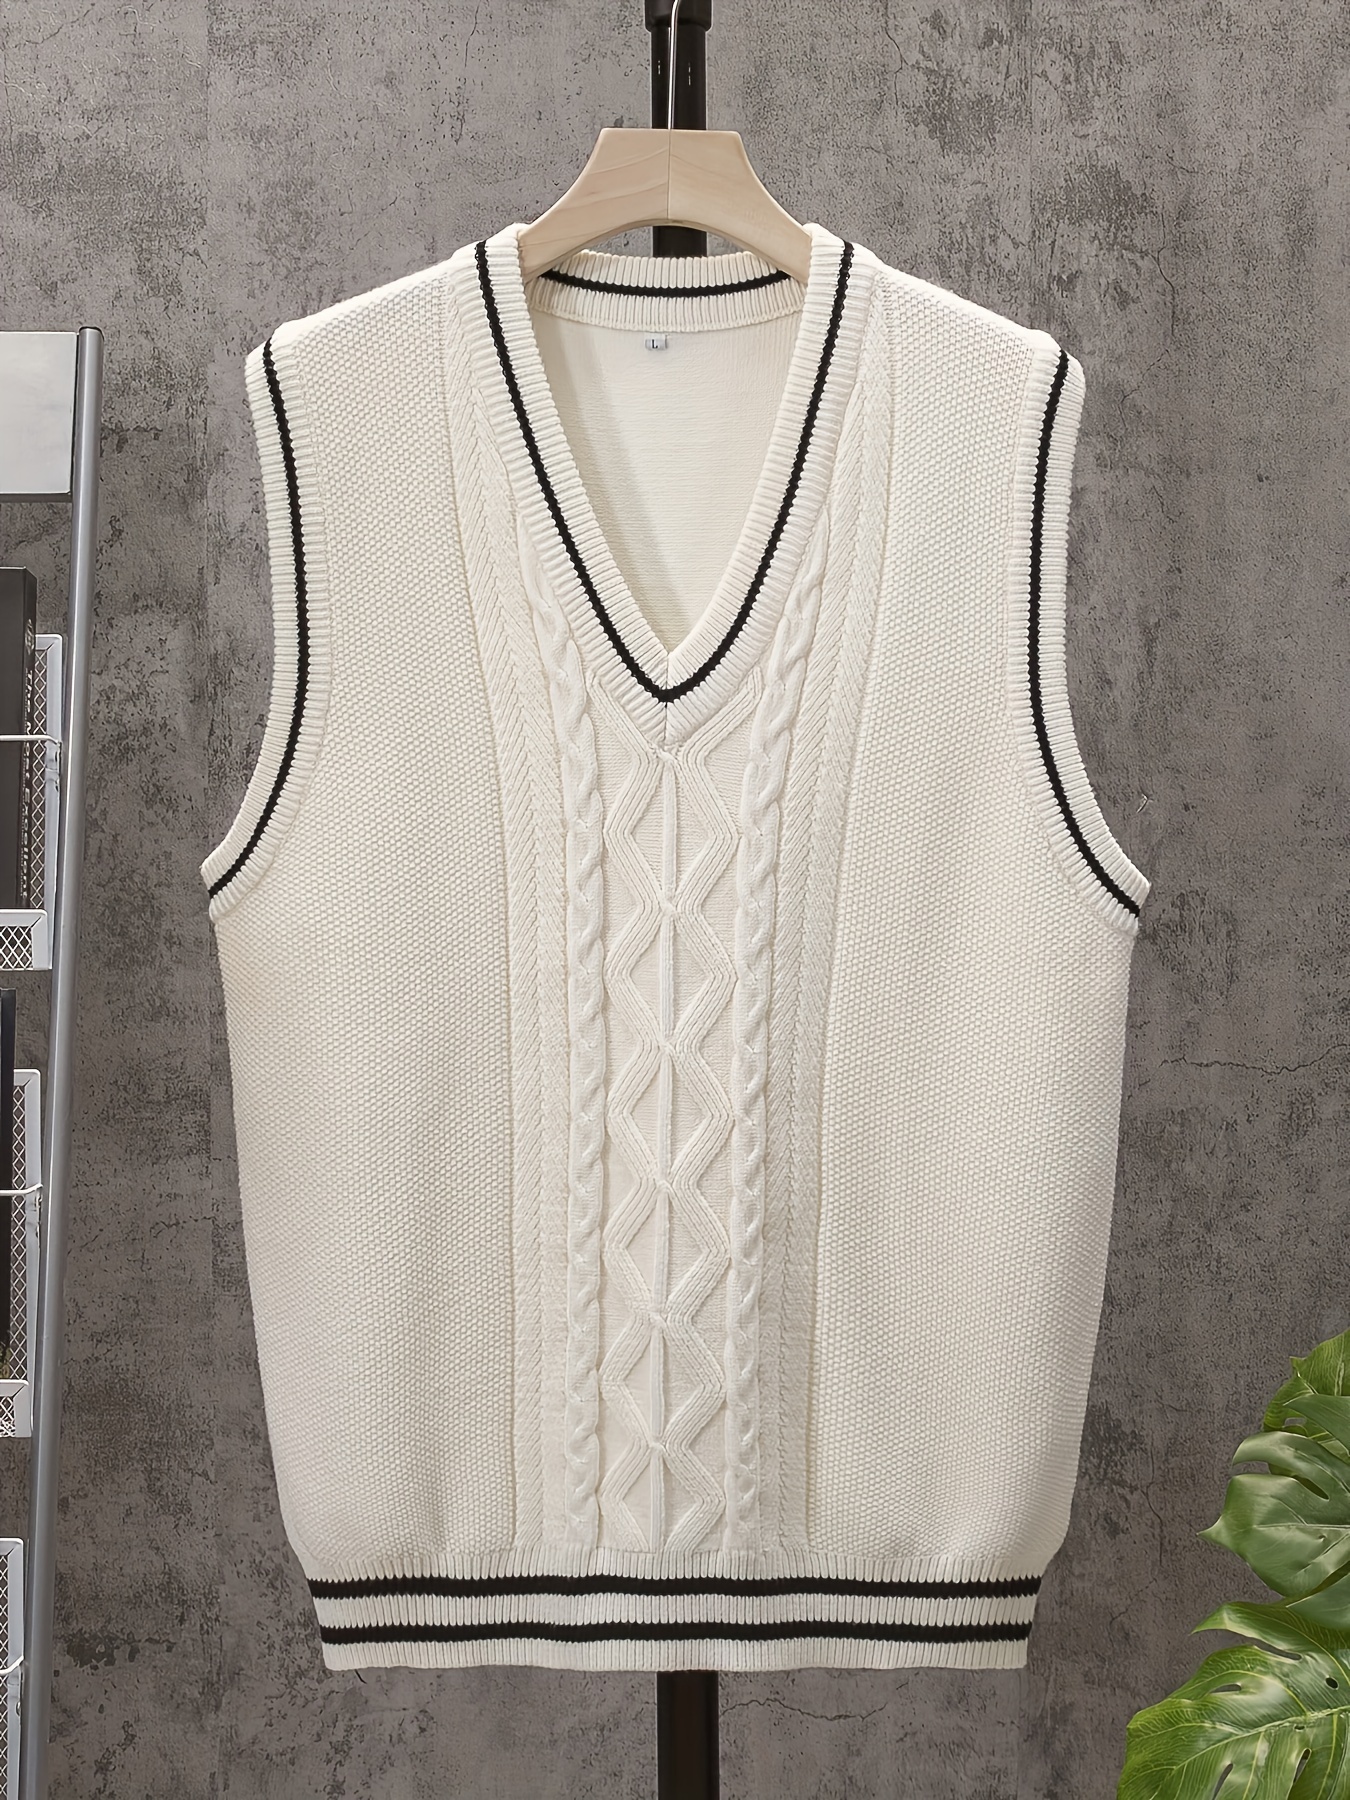 Men's Sweater Vest Pullover Sleeveless Sweaters Cable Knitted V-Neck Slim  Fit